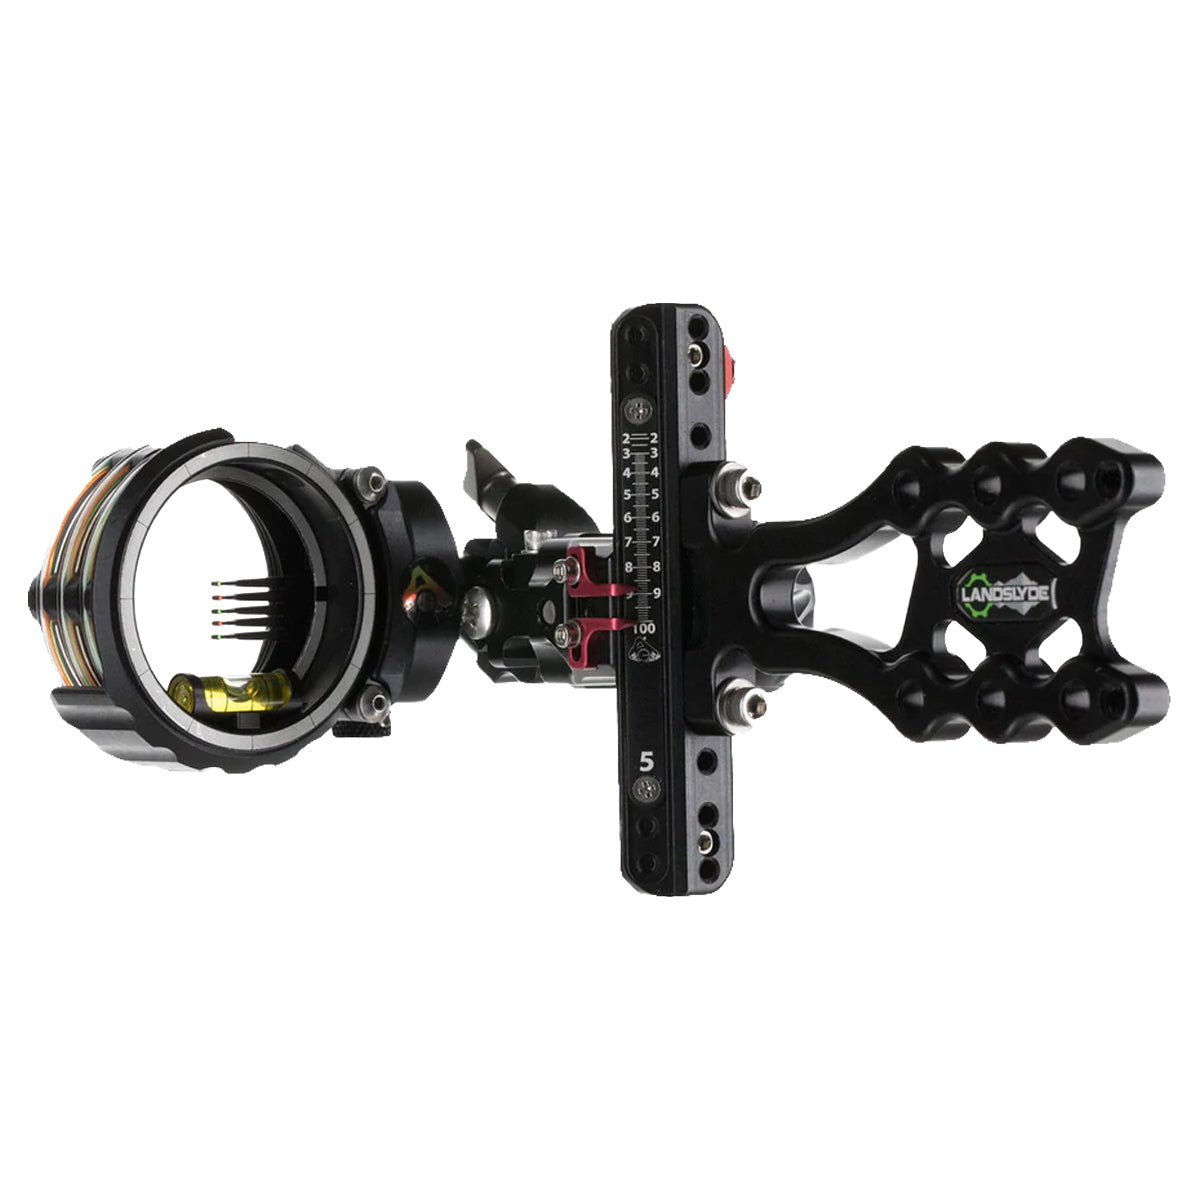 Axcel Landslyde Accustat II Sight 5 Pin Bow Sight in  by GOHUNT | Axcel - GOHUNT Shop